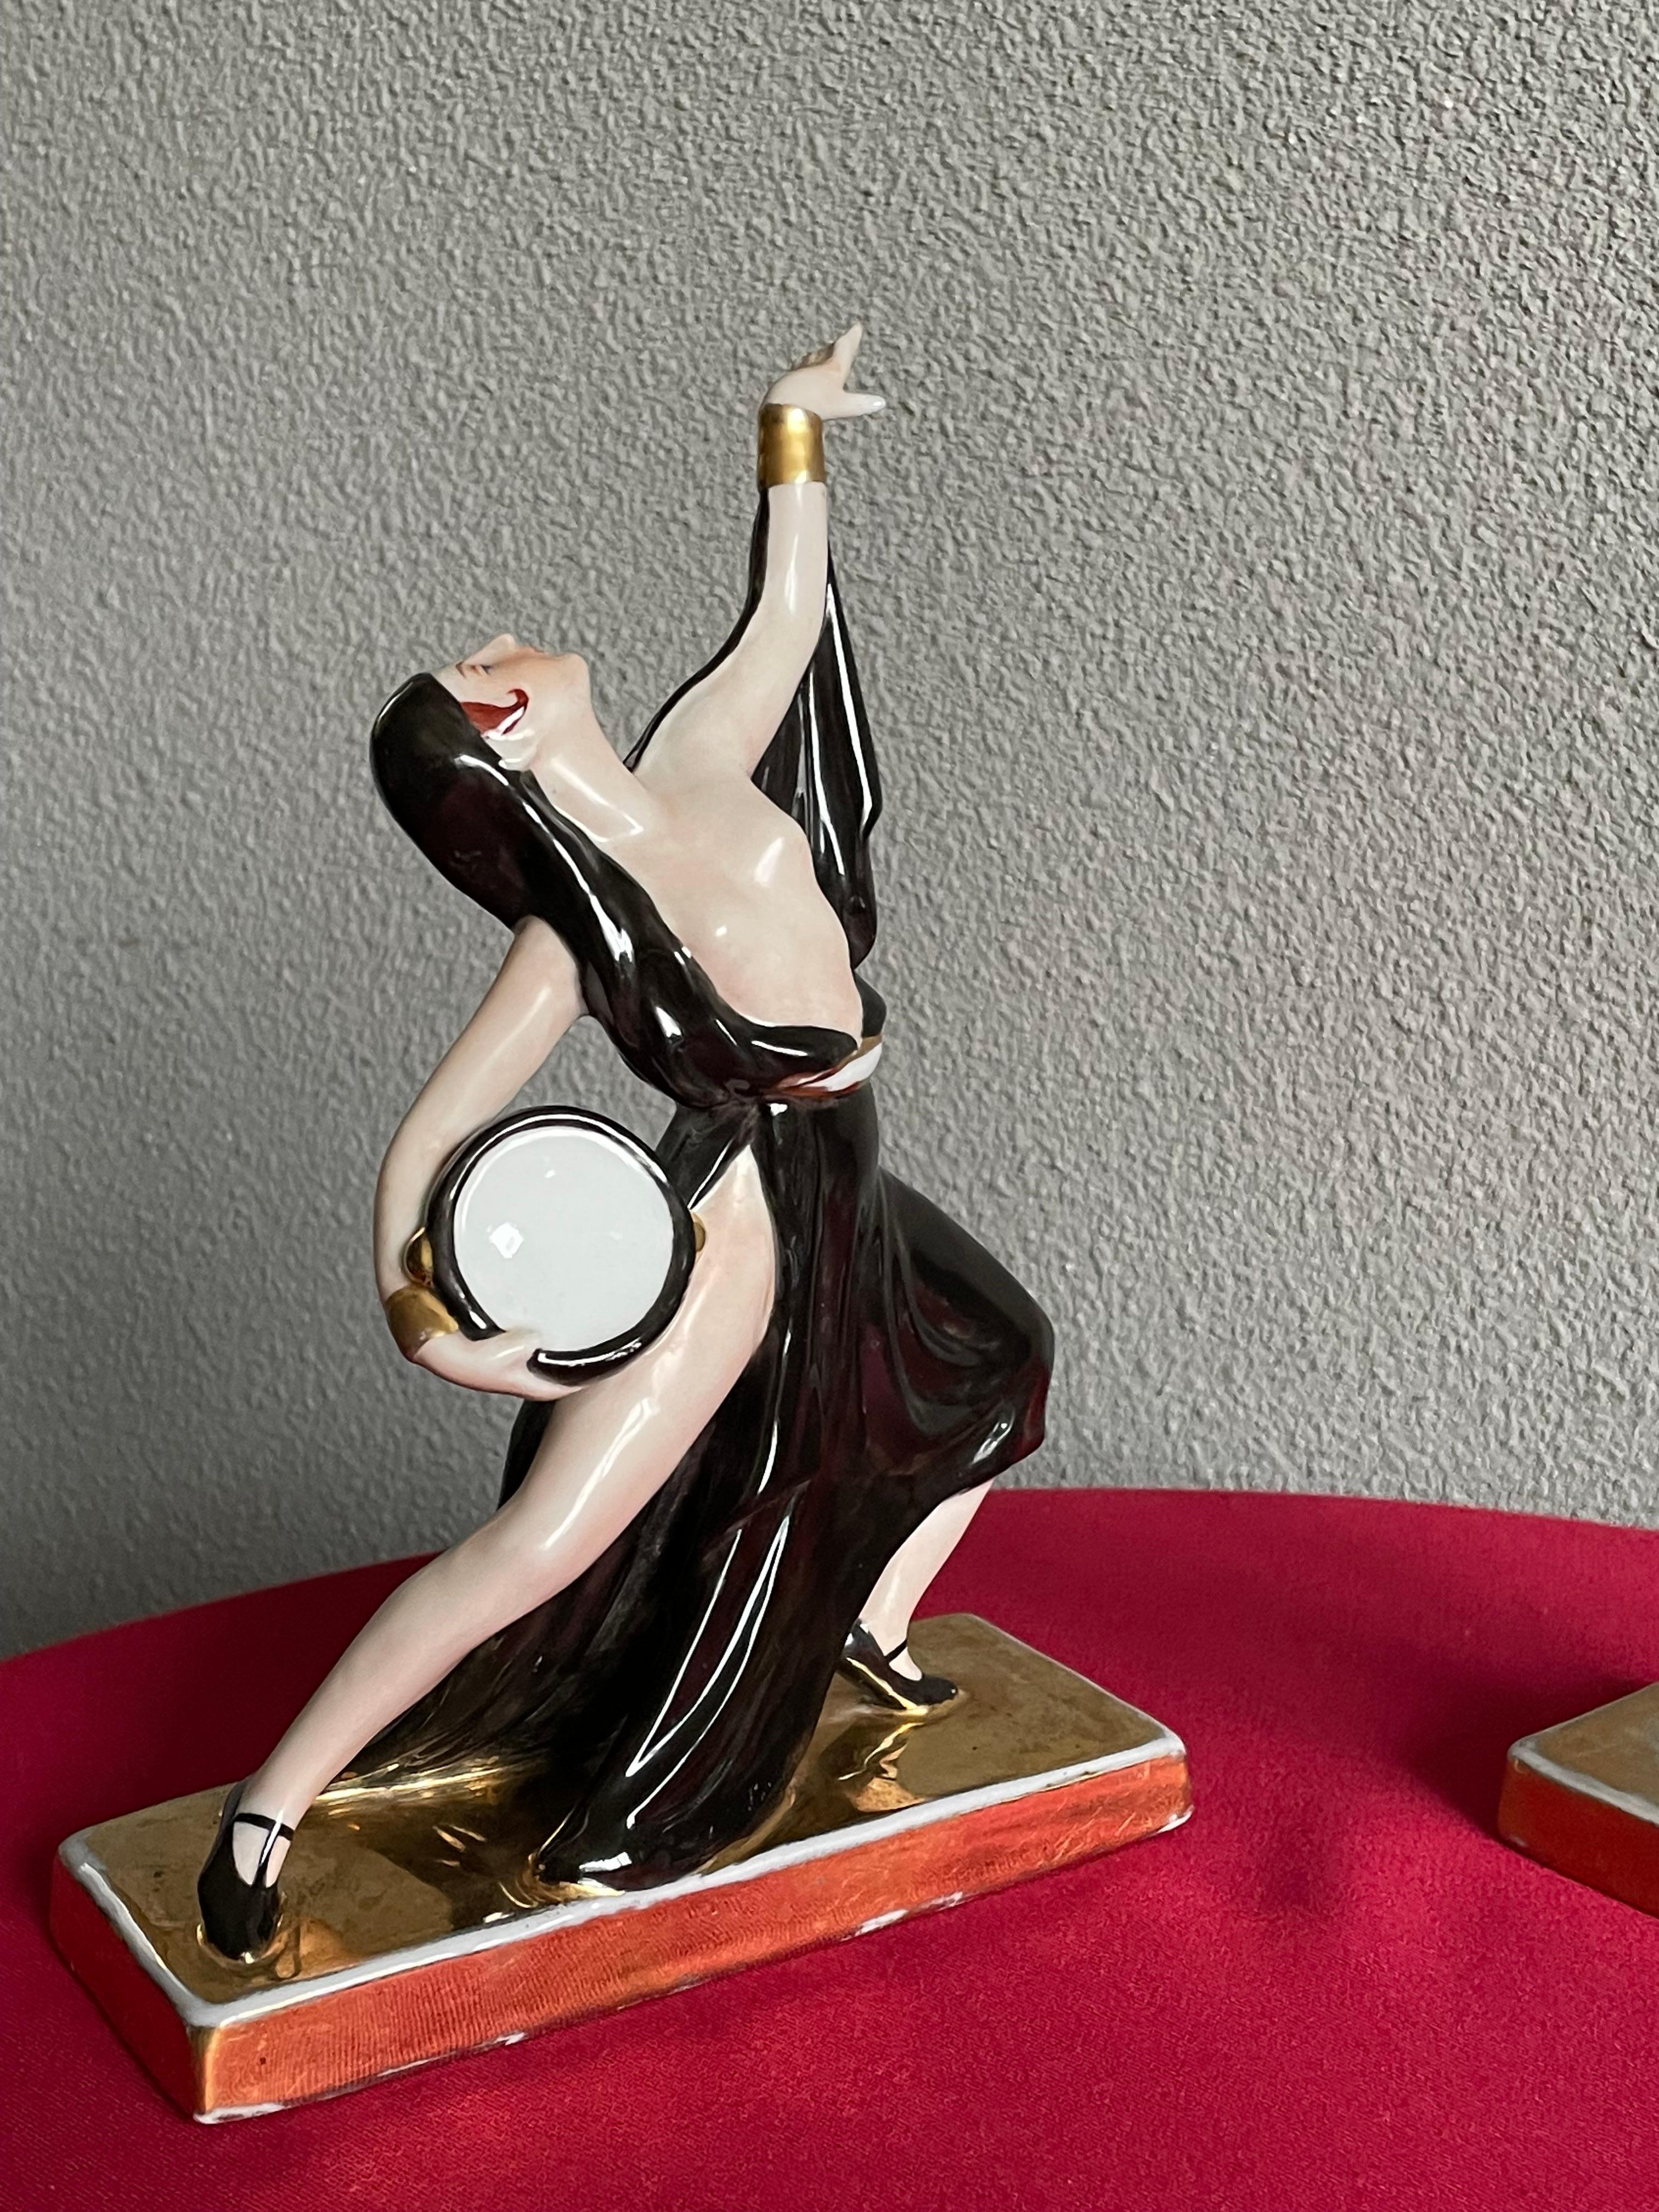 Rare & Stylish Pair of 1920s Porcelain French Art Deco Risque Dancer Bookends For Sale 8